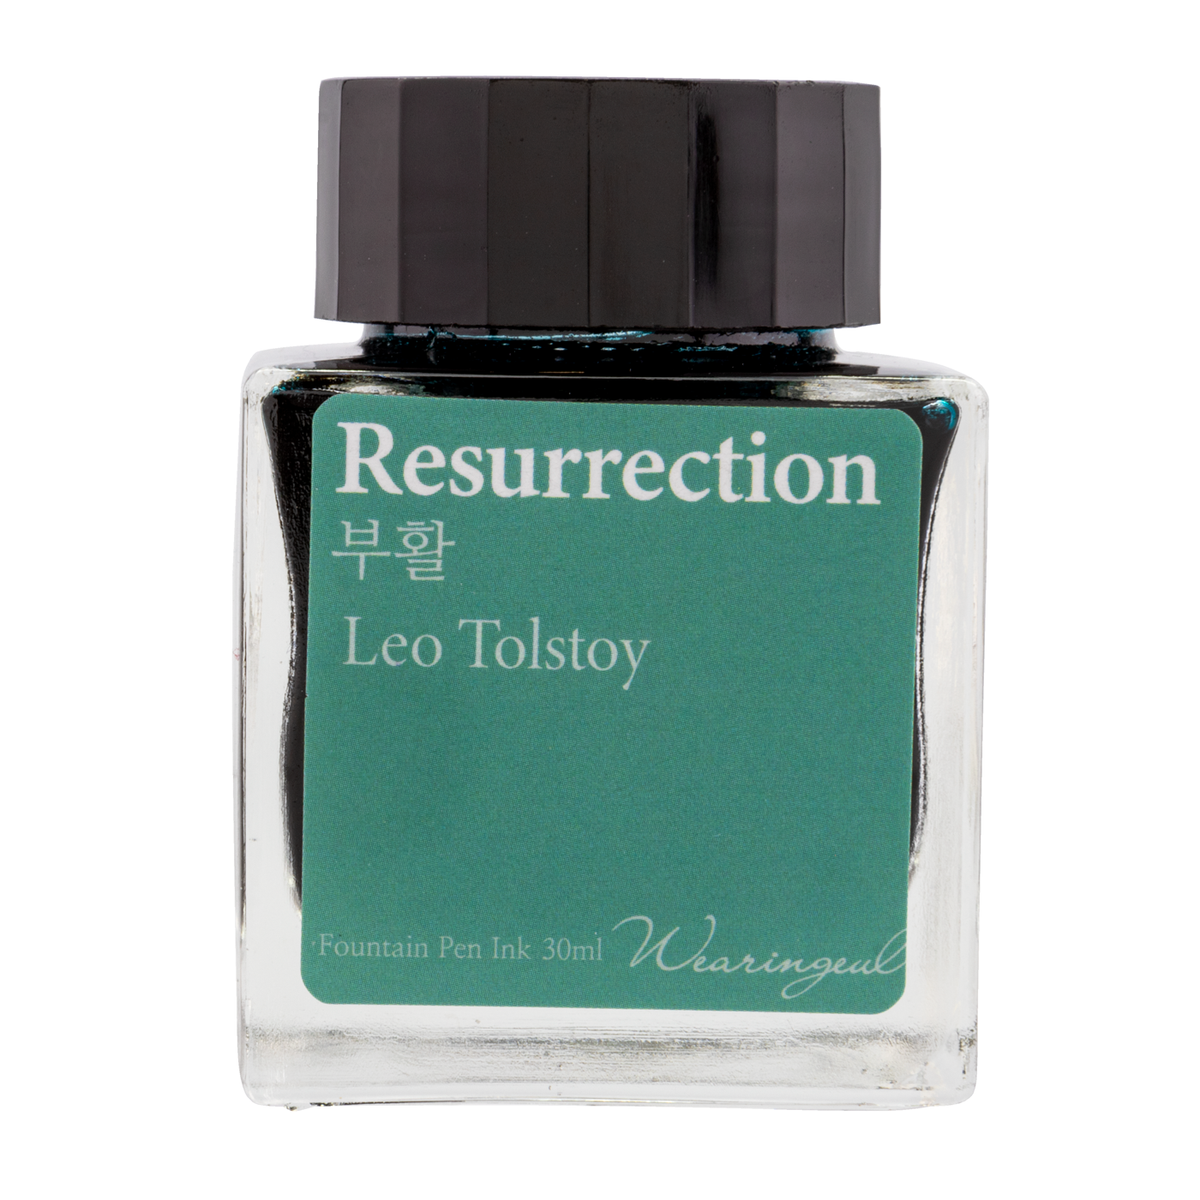 Wearingeul - Monthly World Literature ink Collection - Resurrection